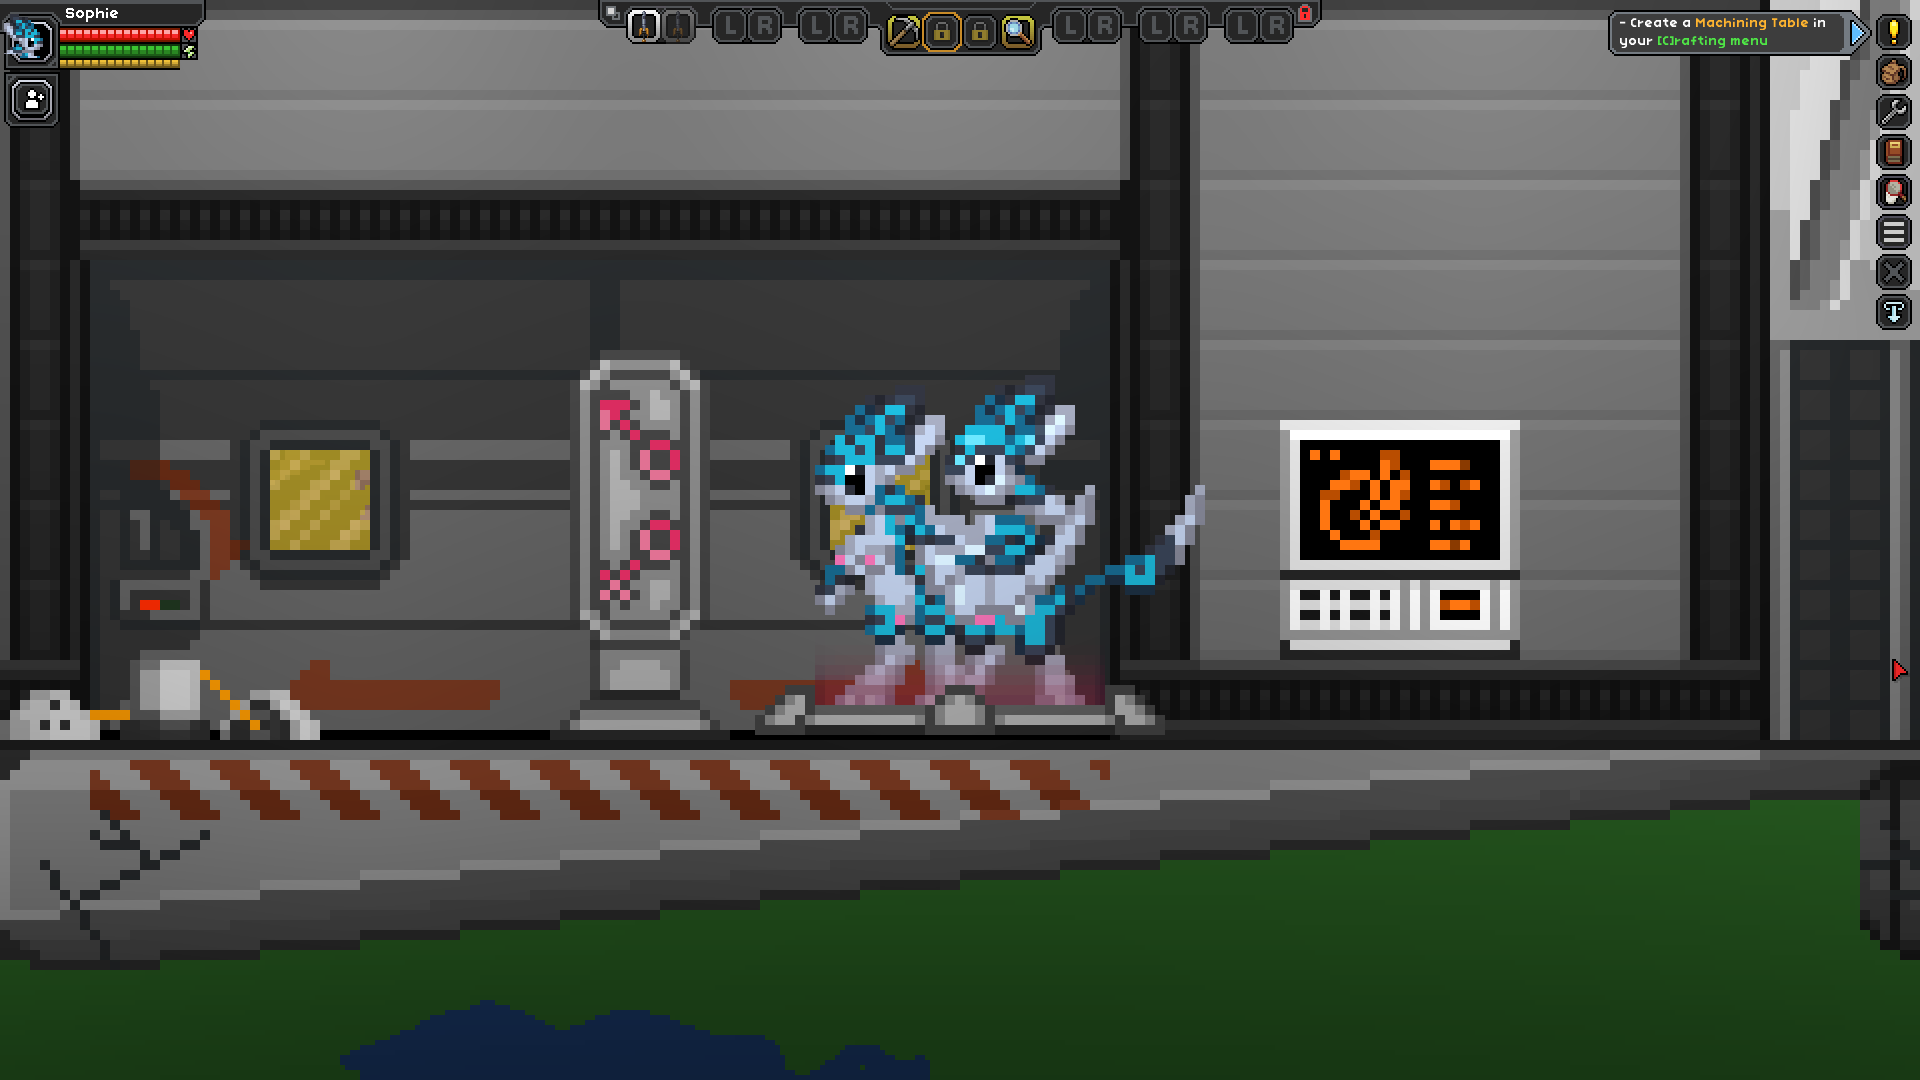 Gallery of Starbound Race Mod.